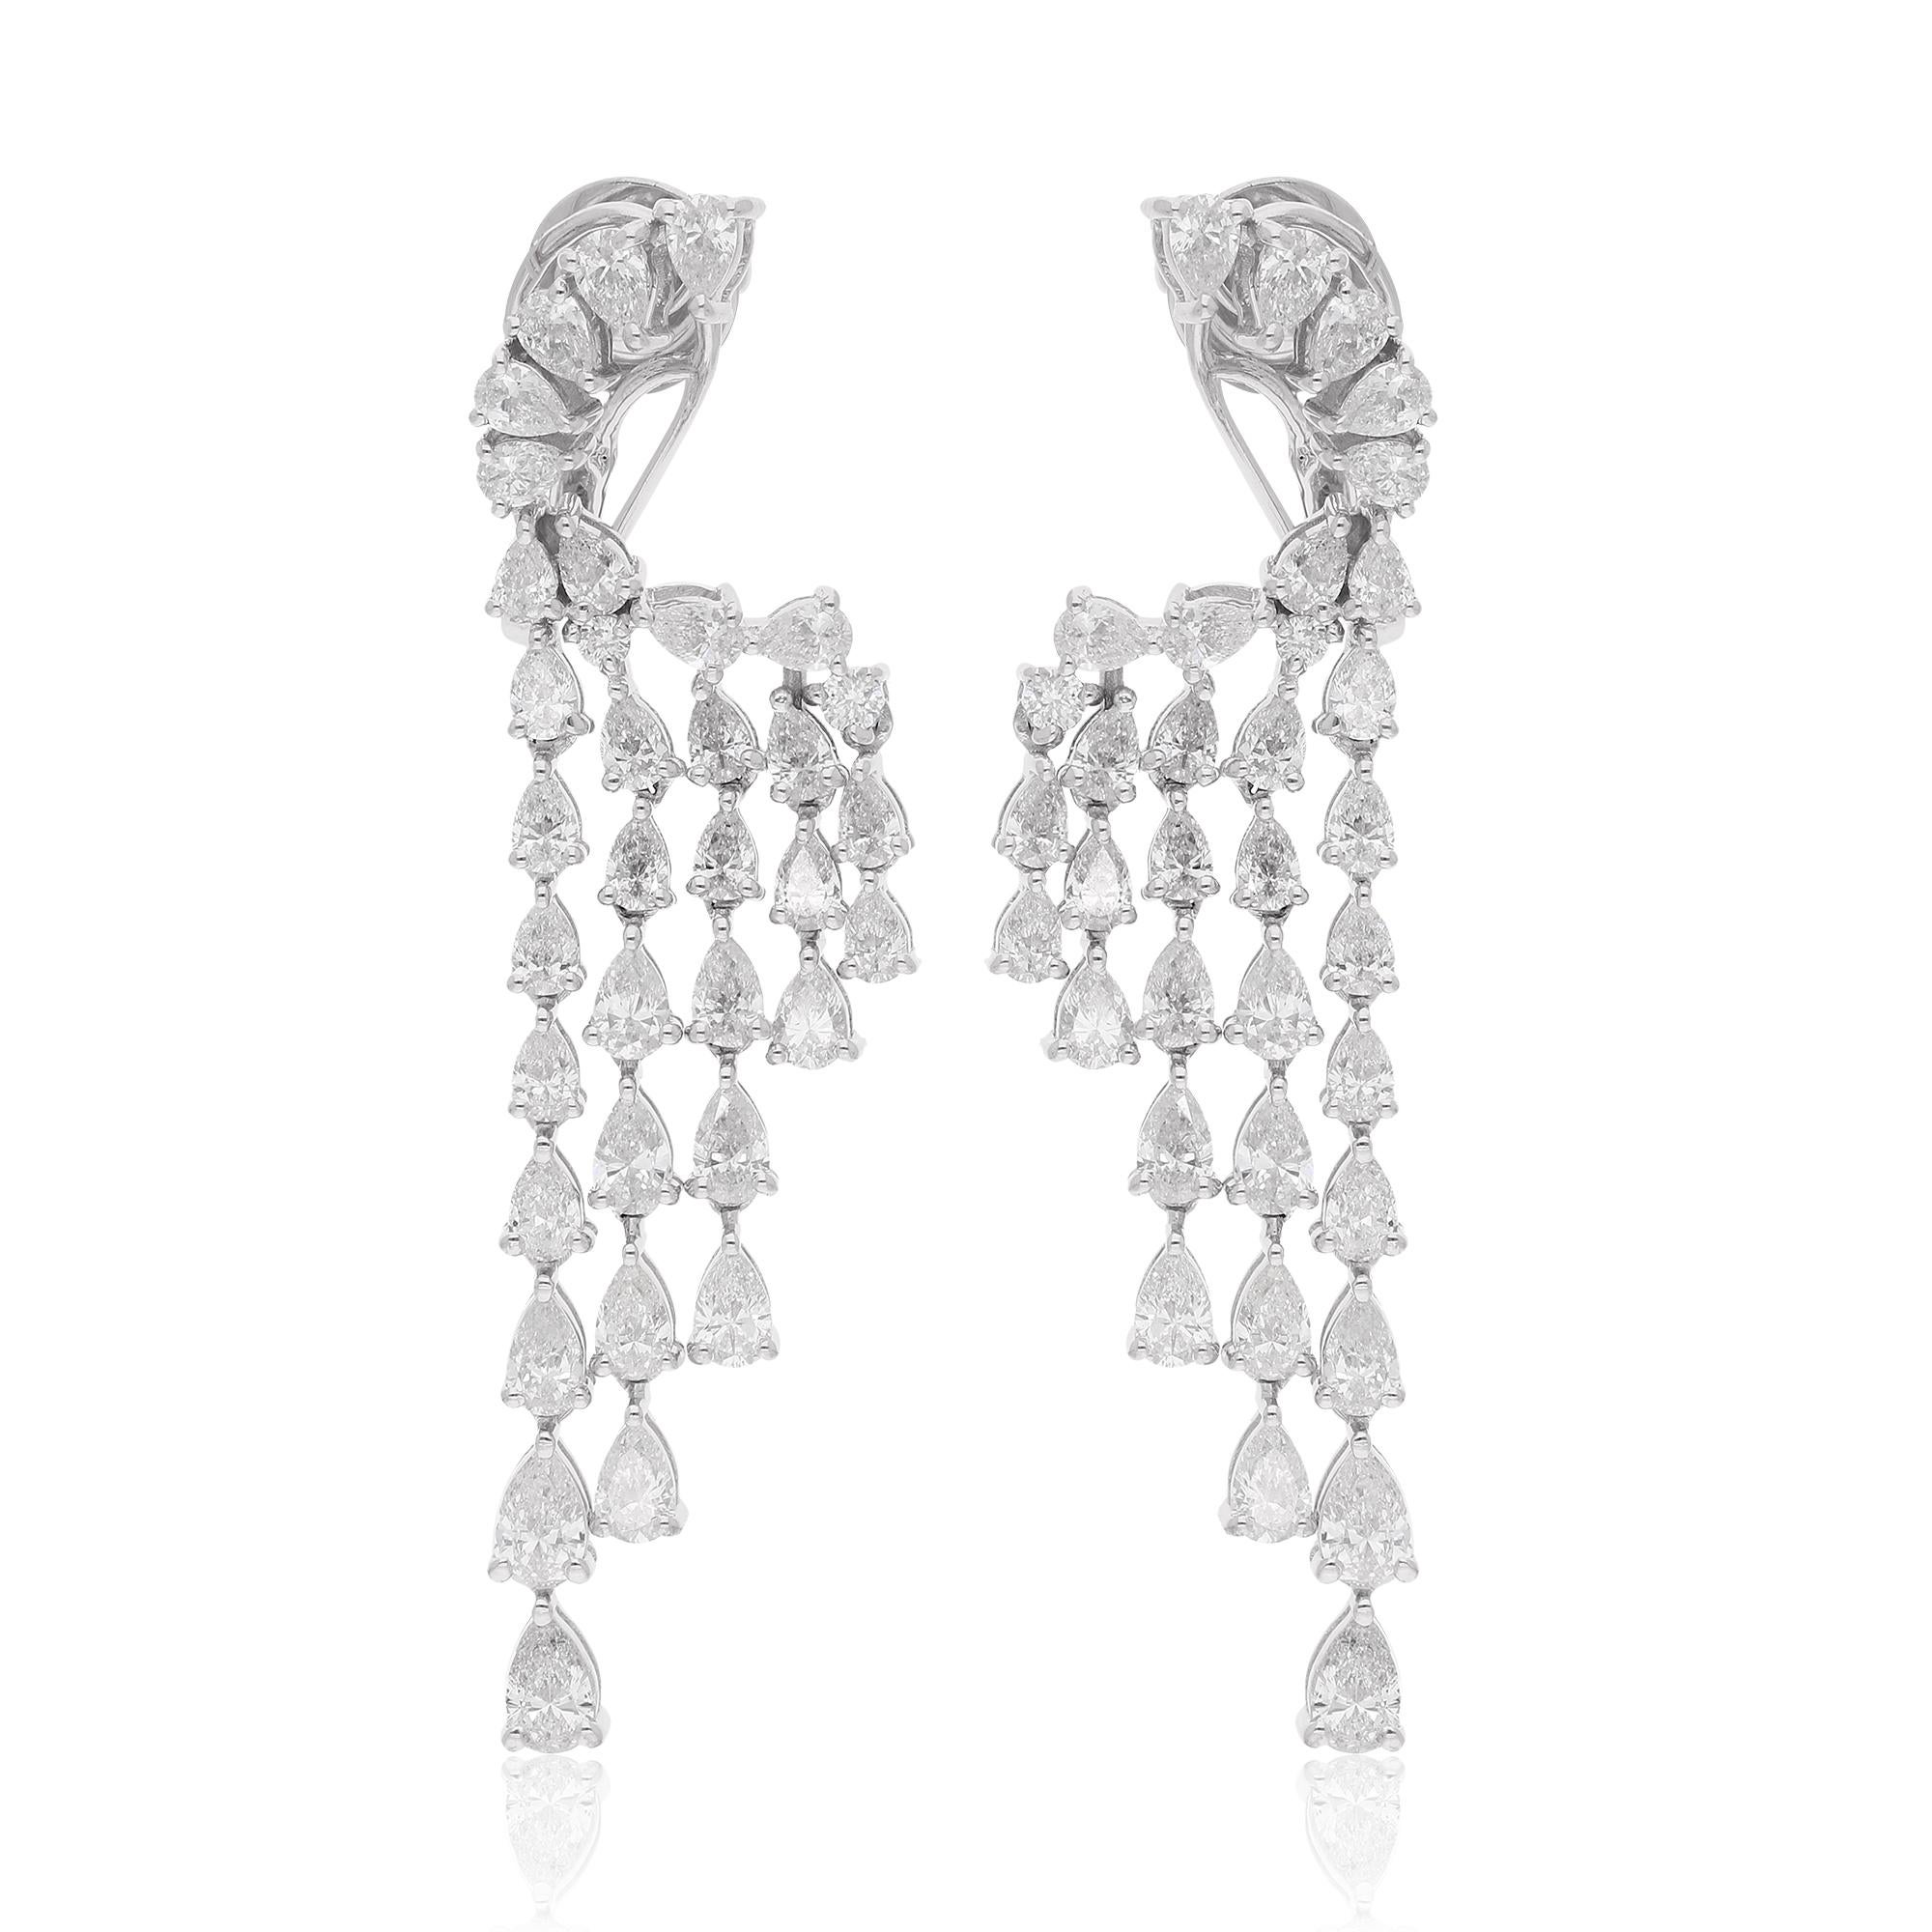 We're describing a pair of dangle earrings made from 18 karat white gold, featuring a combination of pear-shaped and round diamonds with a total weight of 4.93 carats. This jewelry is classified as fine jewelry due to the high-quality materials and